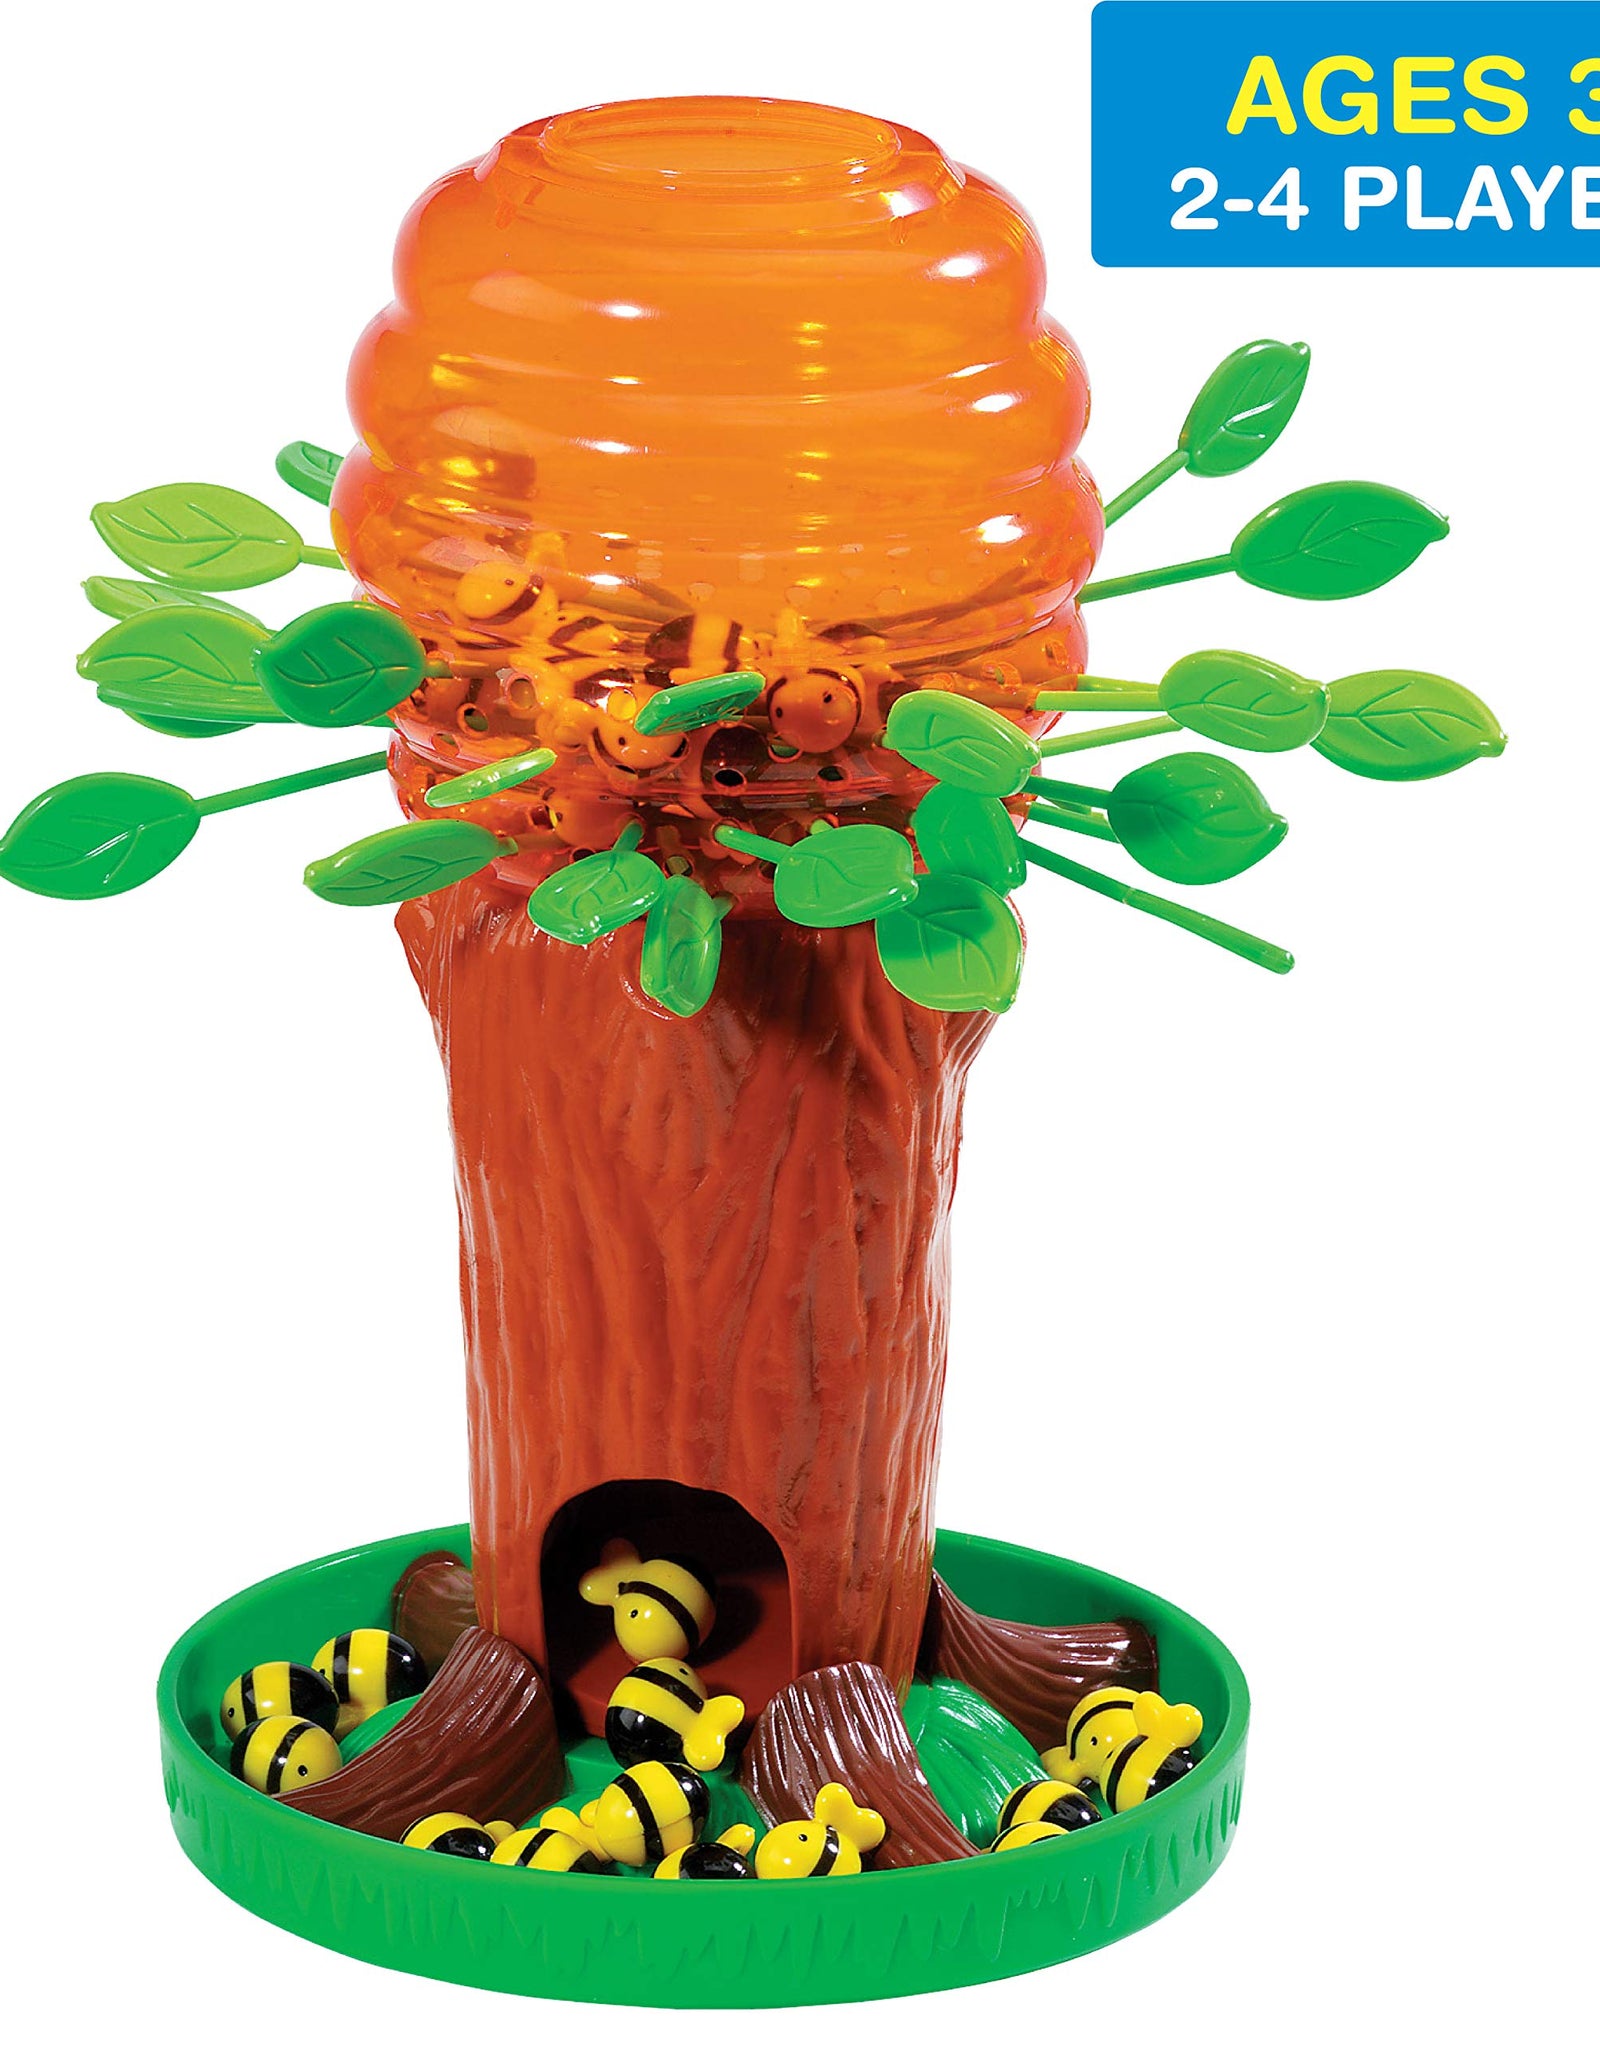 Game Zone Honey Bee Tree Game – Please Don’t Wake the Bees – 2 to 4 Players, Ages 3 and Up